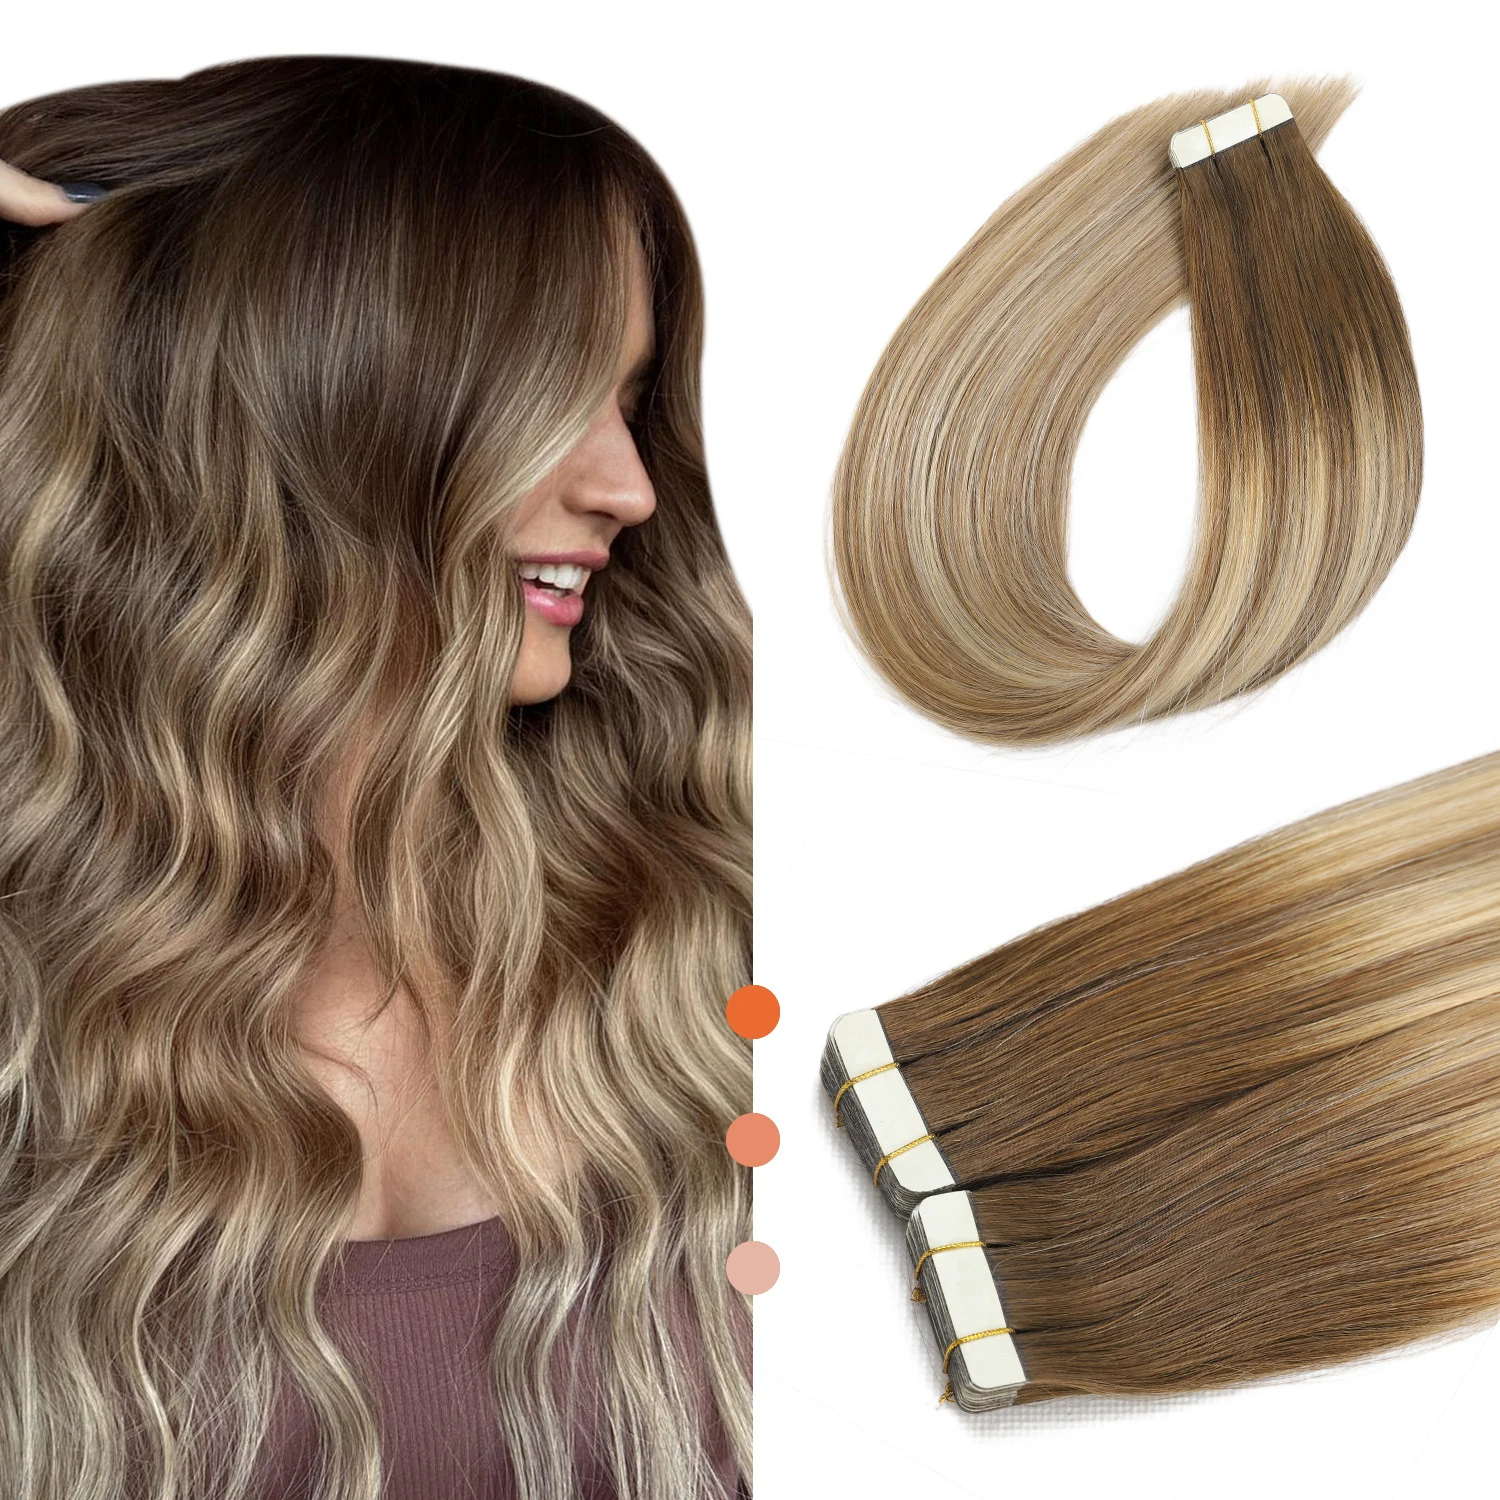 

XDhair 14"-24" Tape In Hair Extensions Human Hair 50g 20pcs Balayage Walnut Brown to Ash Brown and Blonde Tape Hair Extension